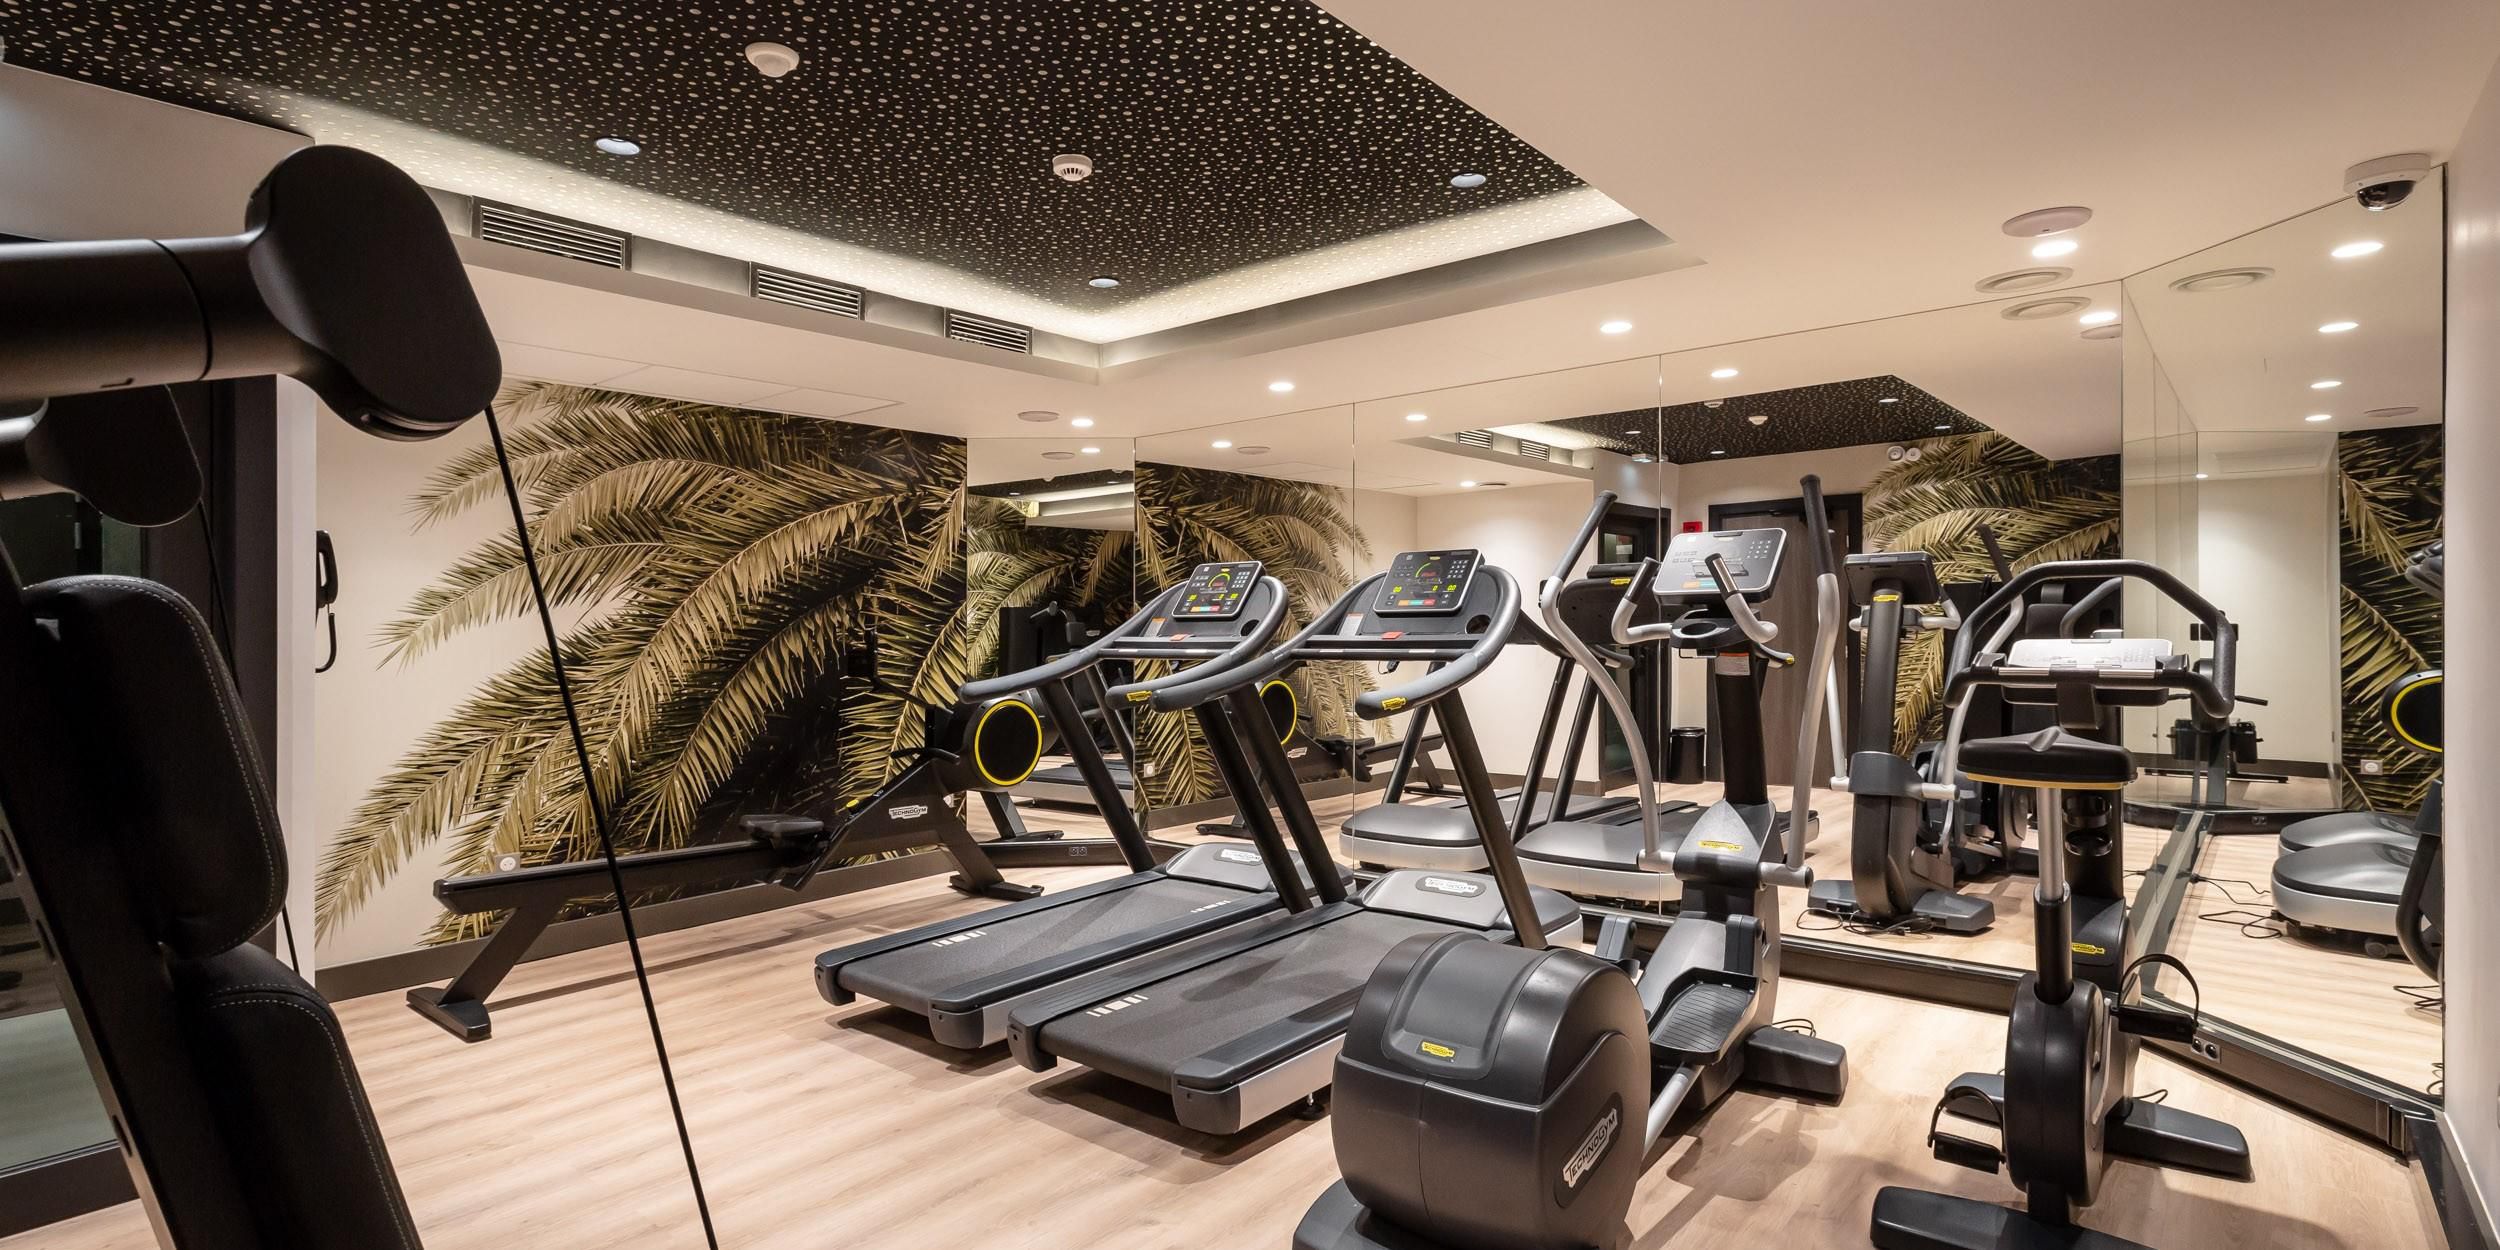 There’s no need to skip your workout while you’re here. Our fitness centre has rowing machines, stationary bikes and treadmills.